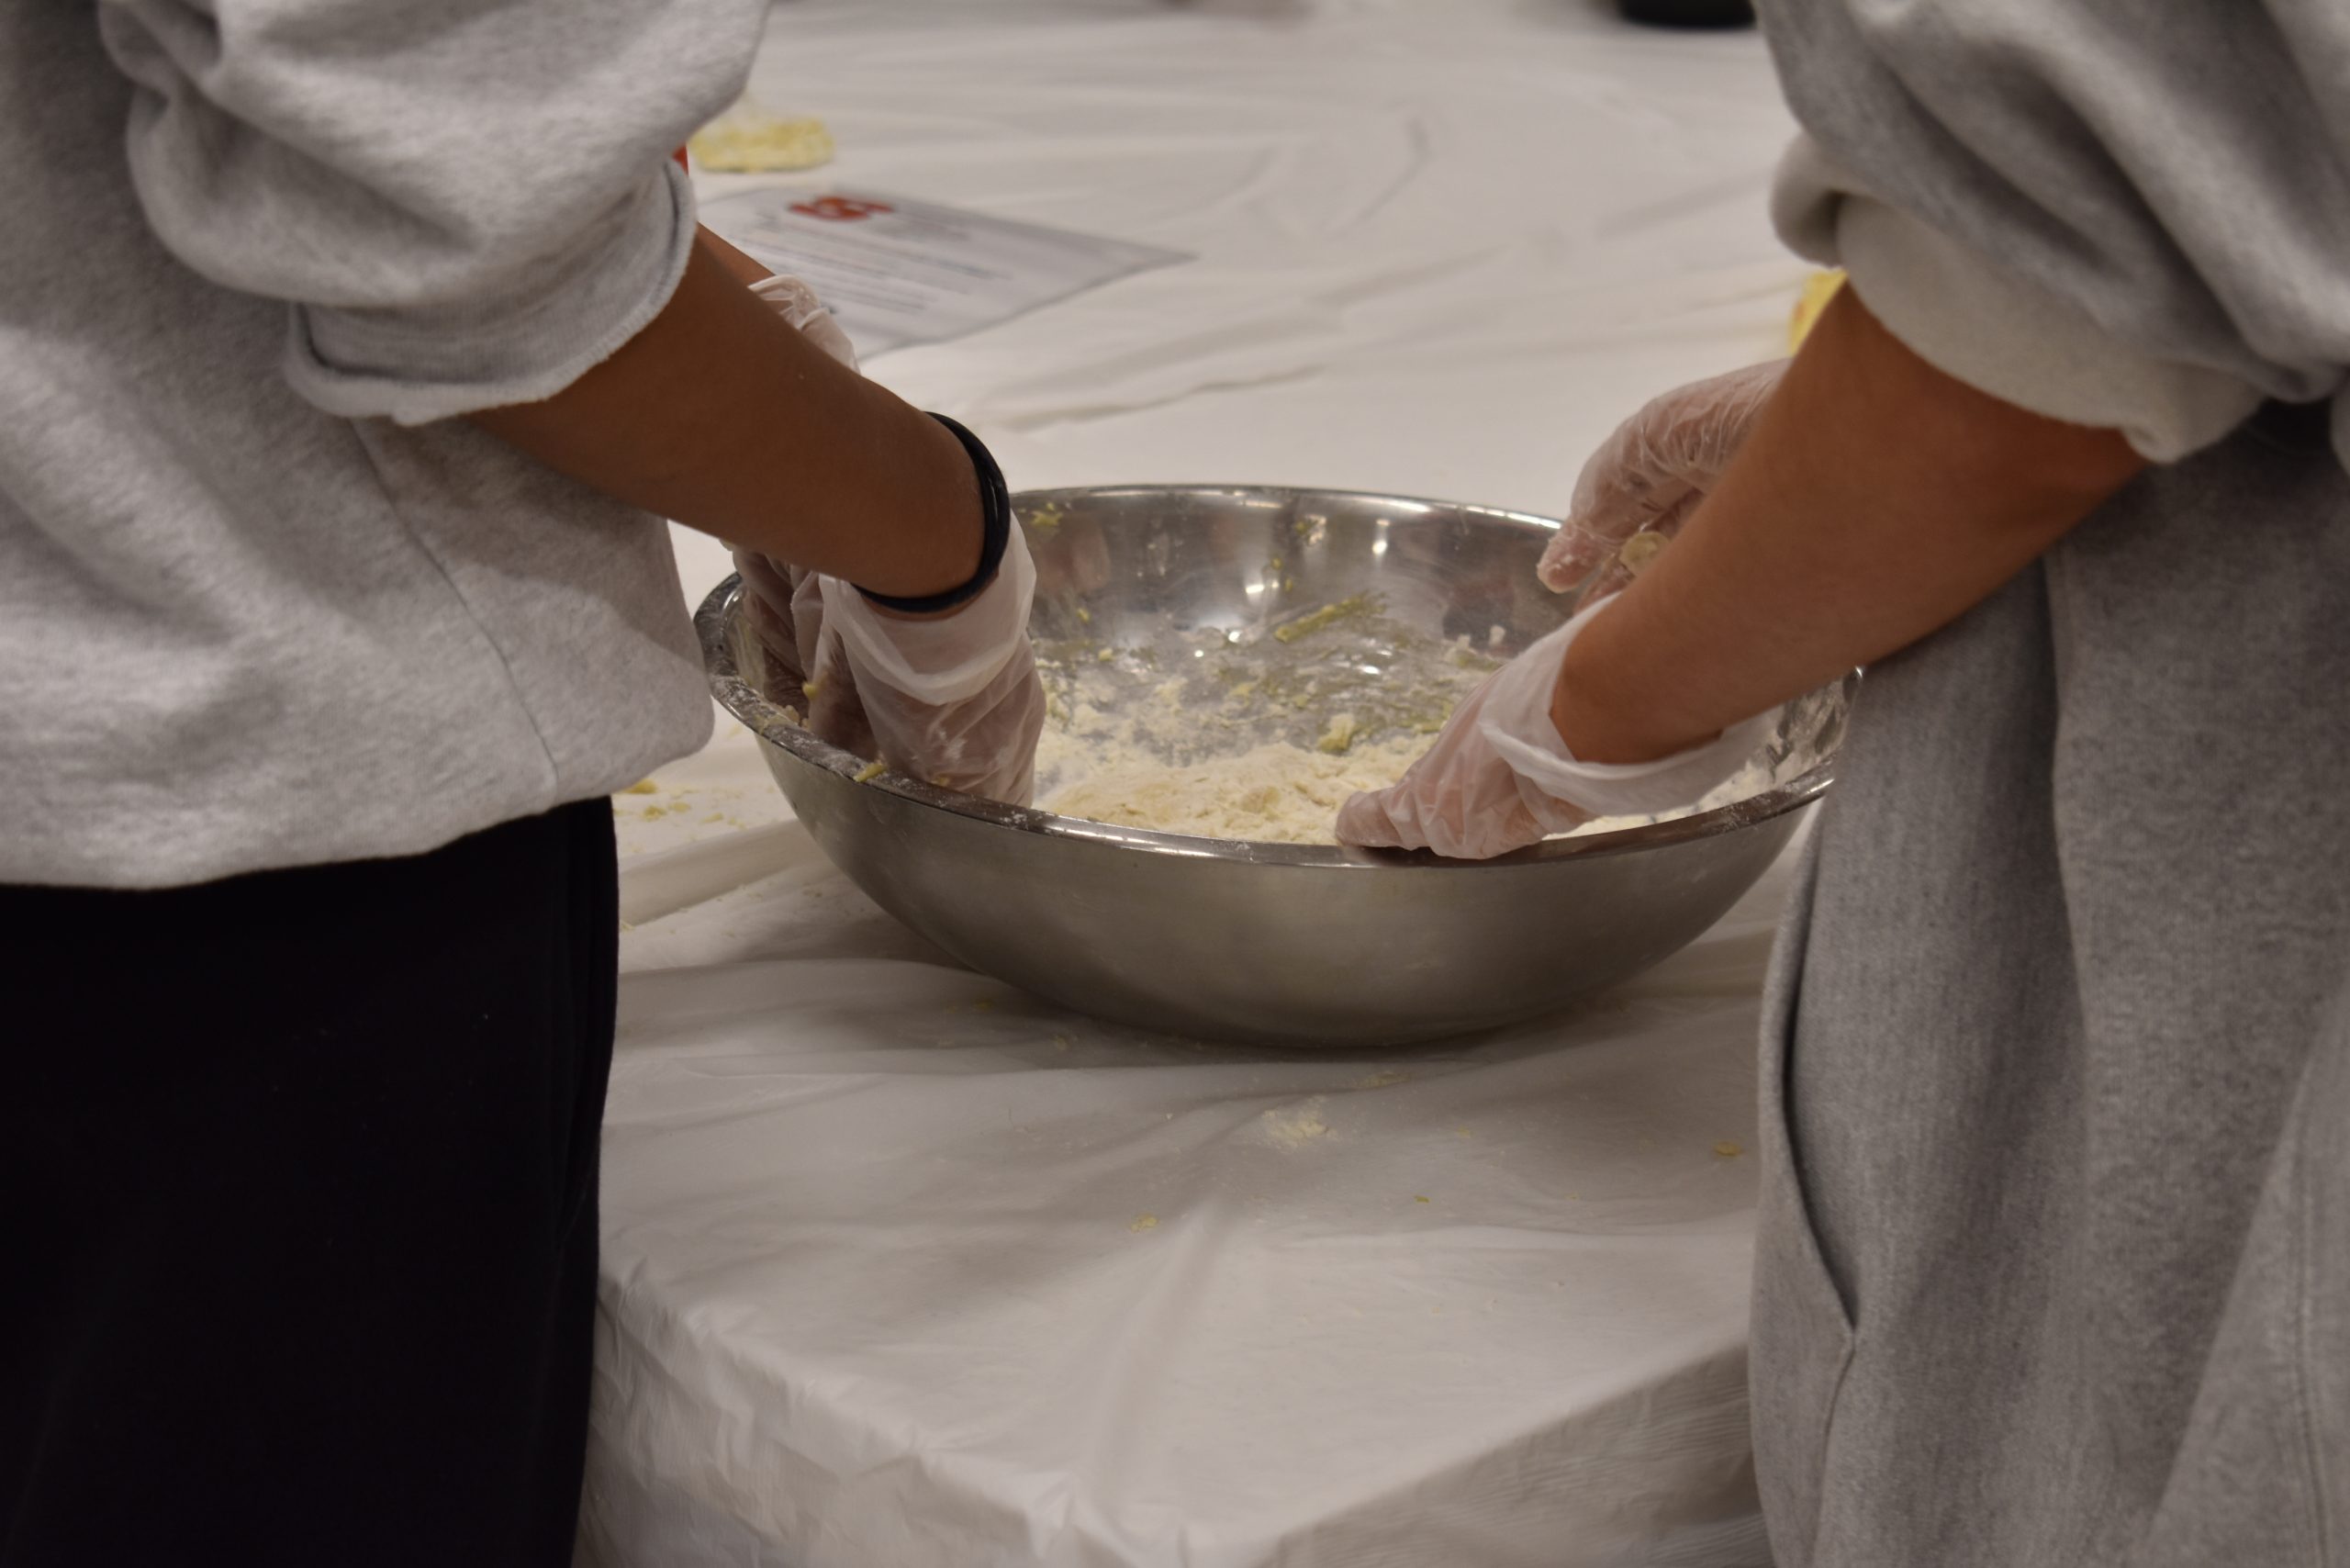 Students mix challah dough by hand at Challah for Hunger's bake event.